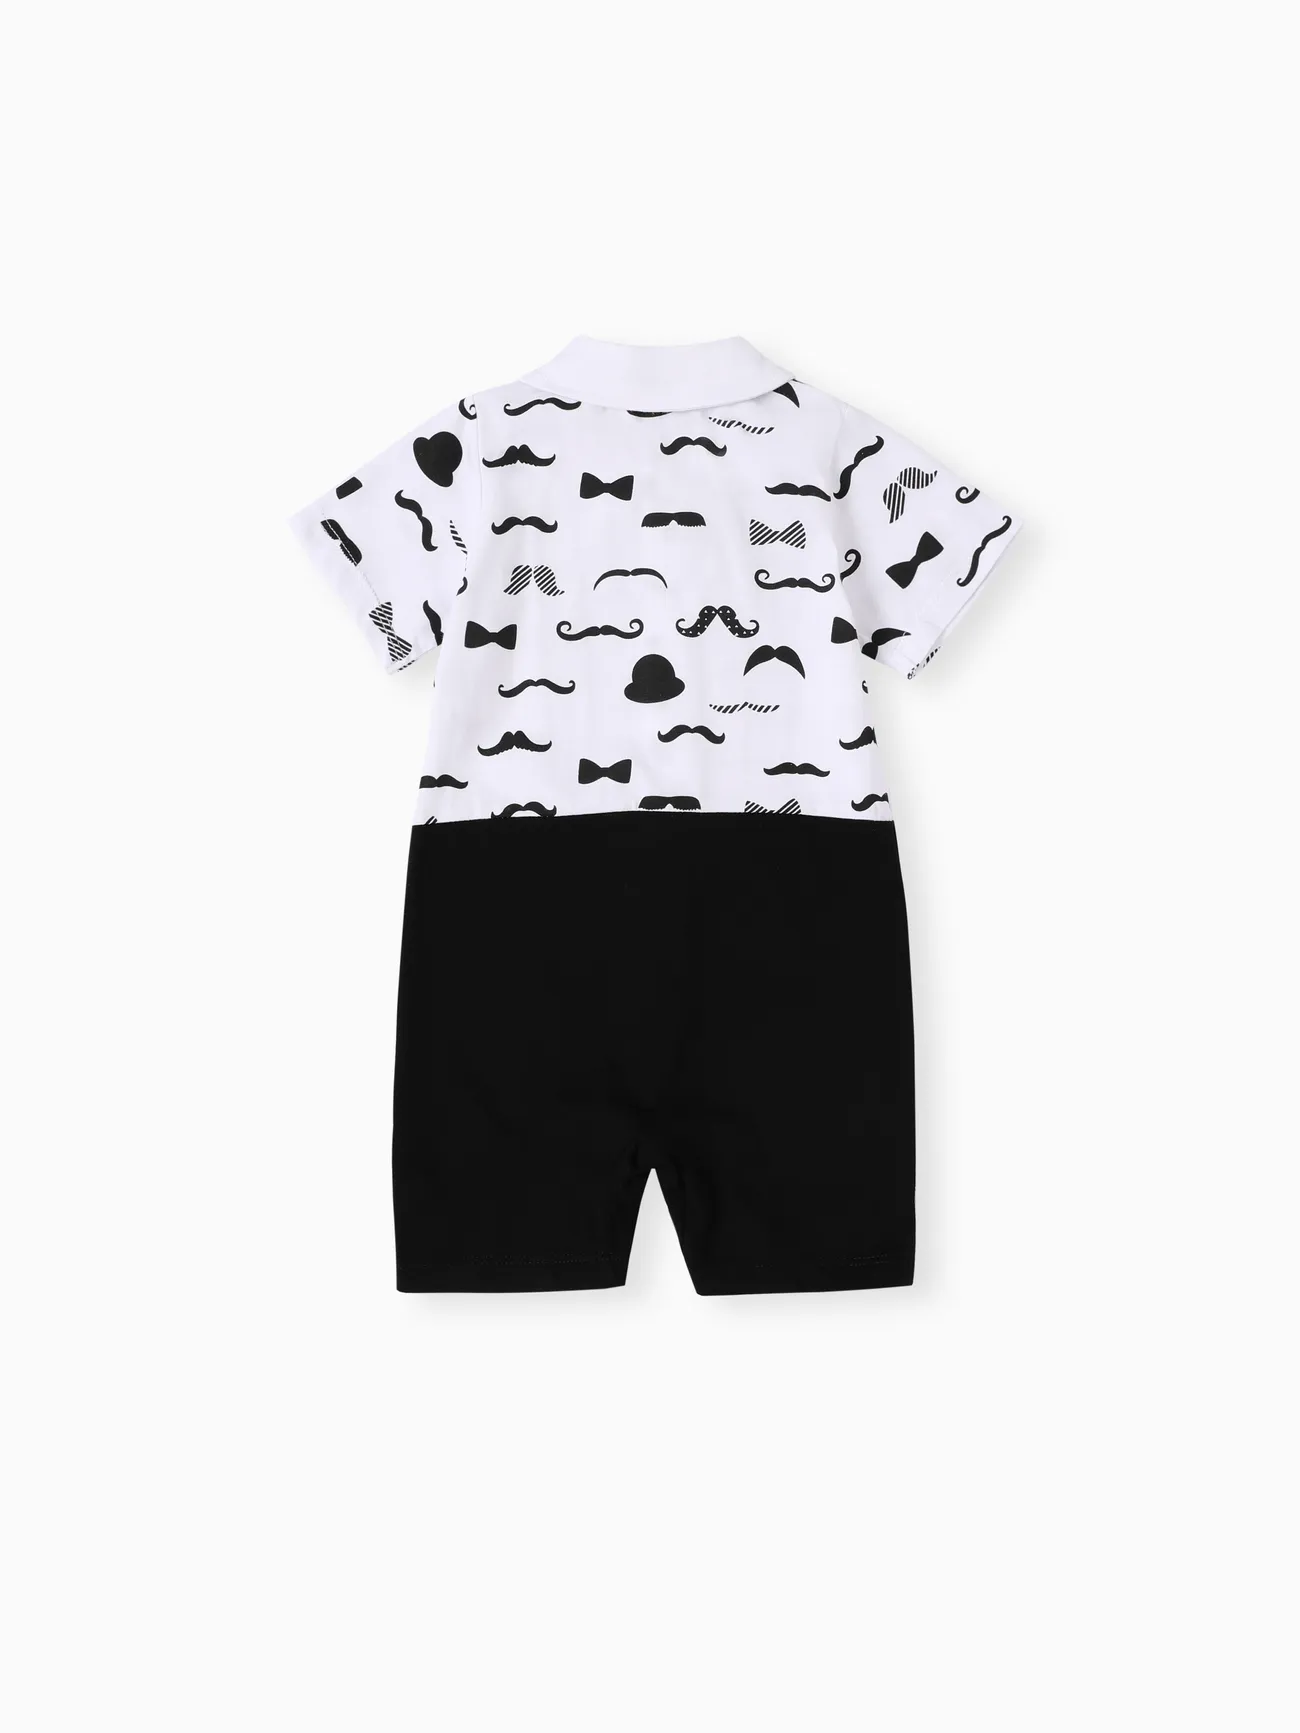 Baby Boy Casual Cotton Stitched Fabric Short Sleeve Jumpsuit Black big image 1